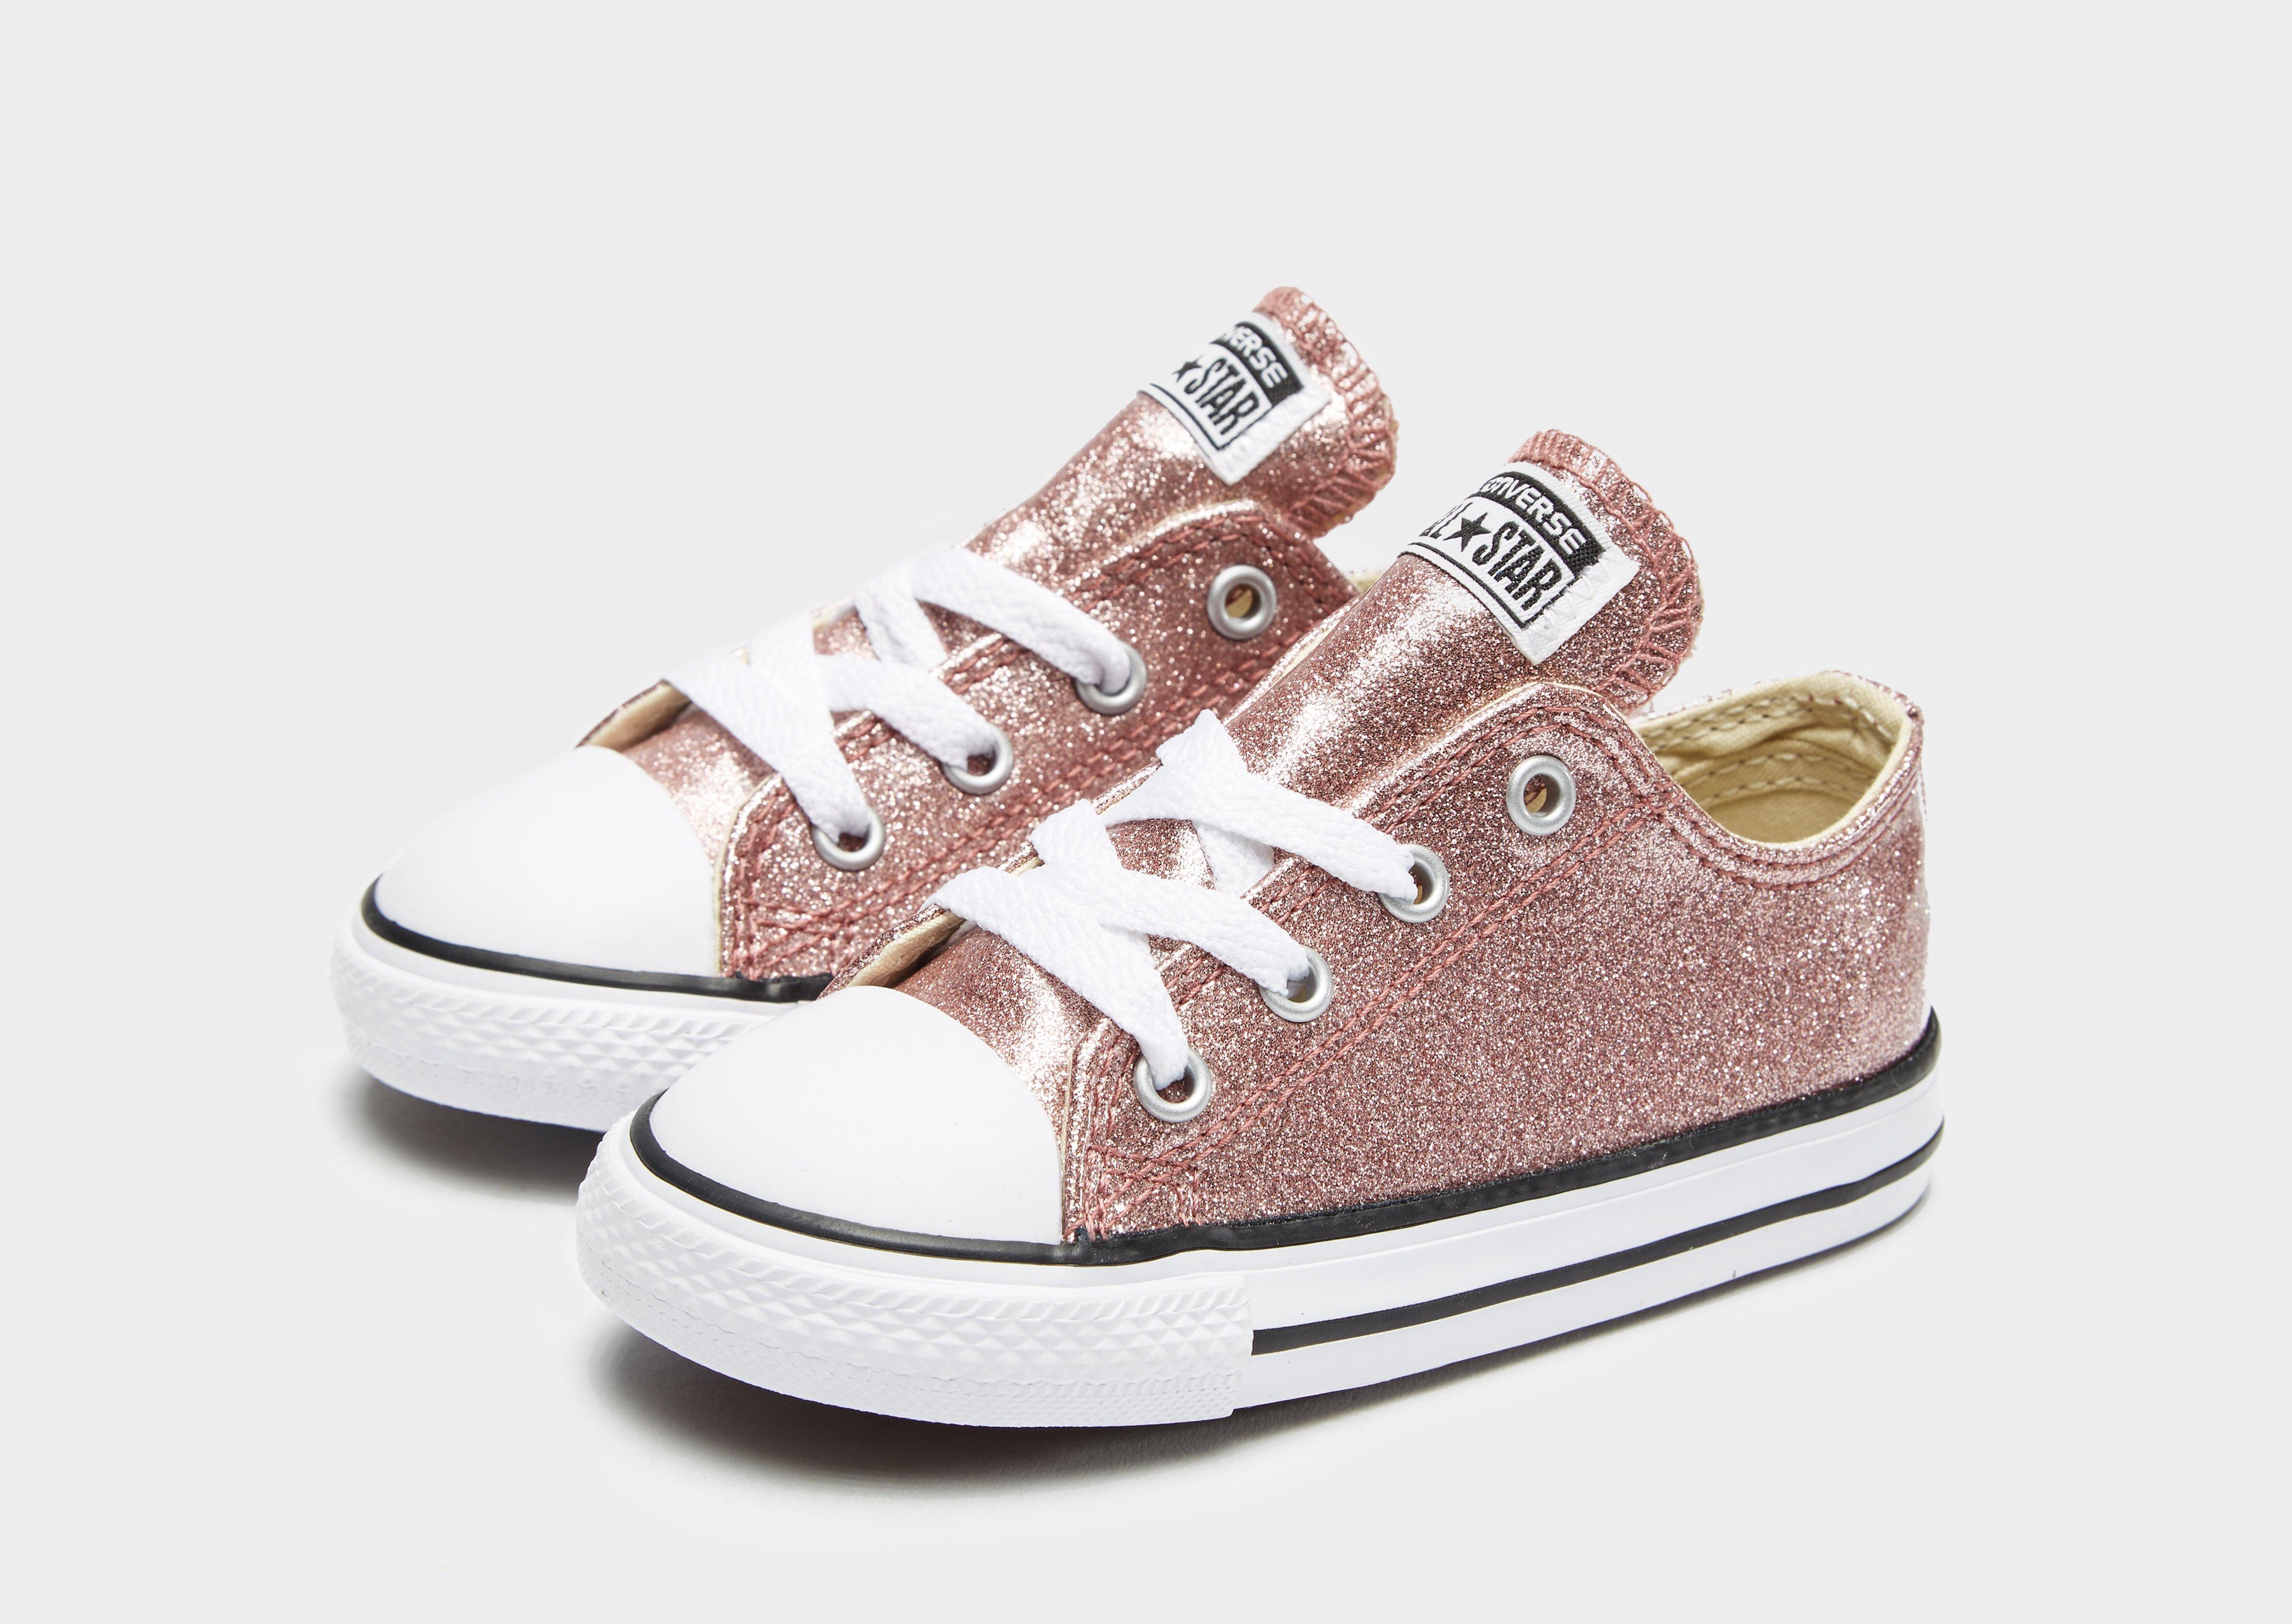 converse all star sparkle ox infant